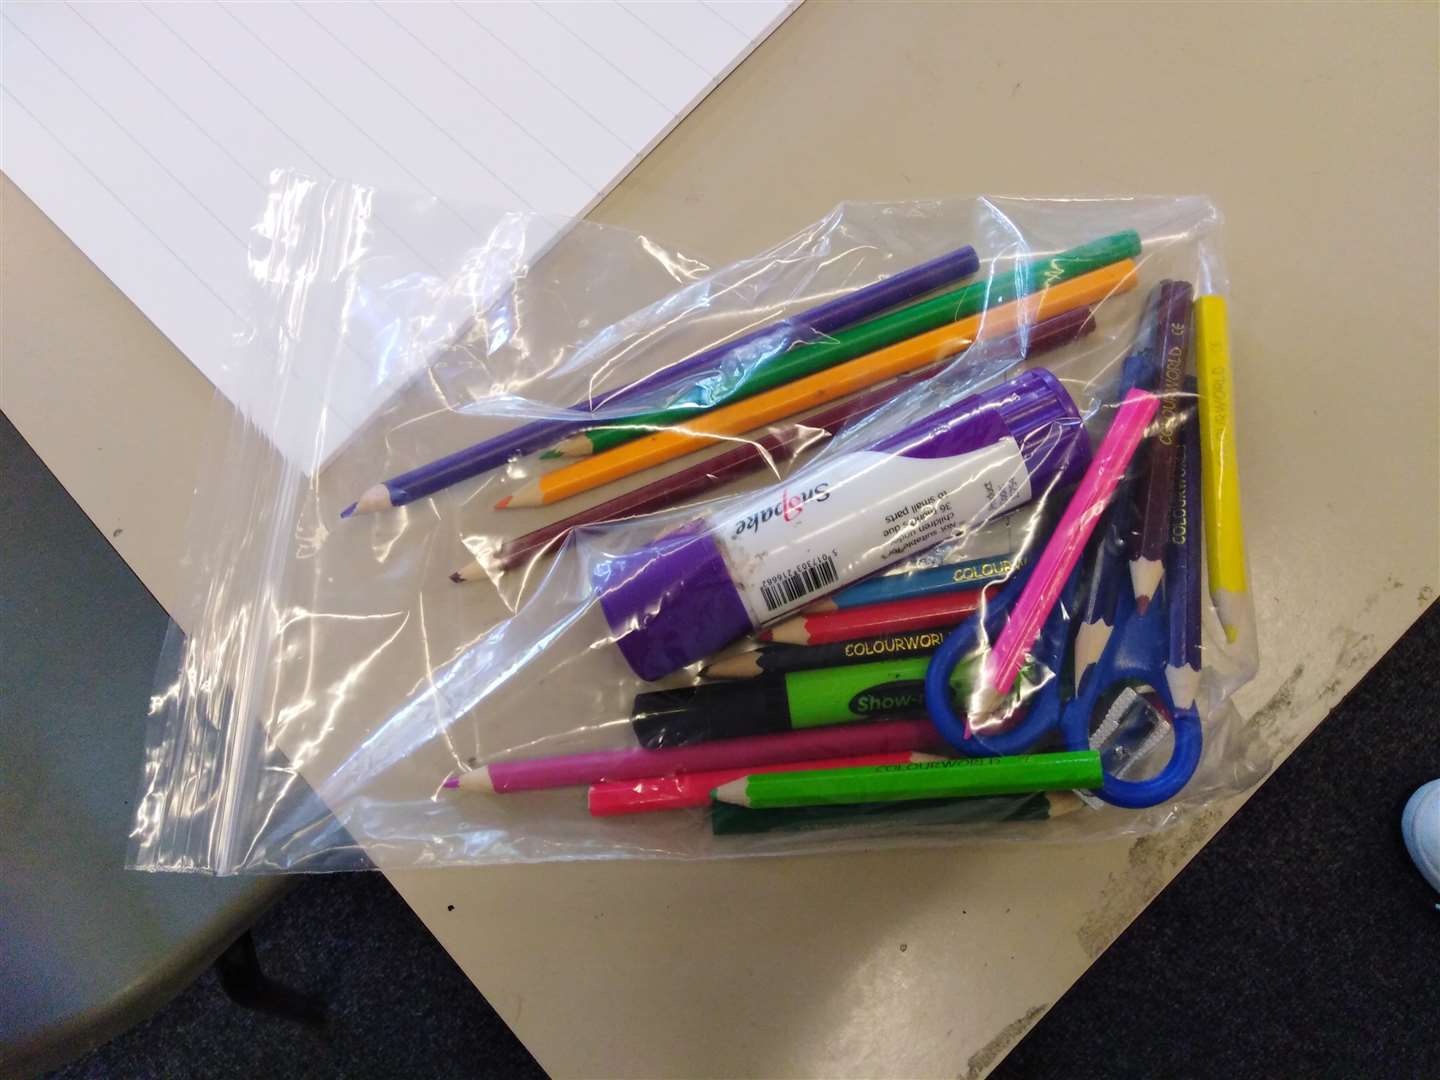 Children have their own bag of stationery